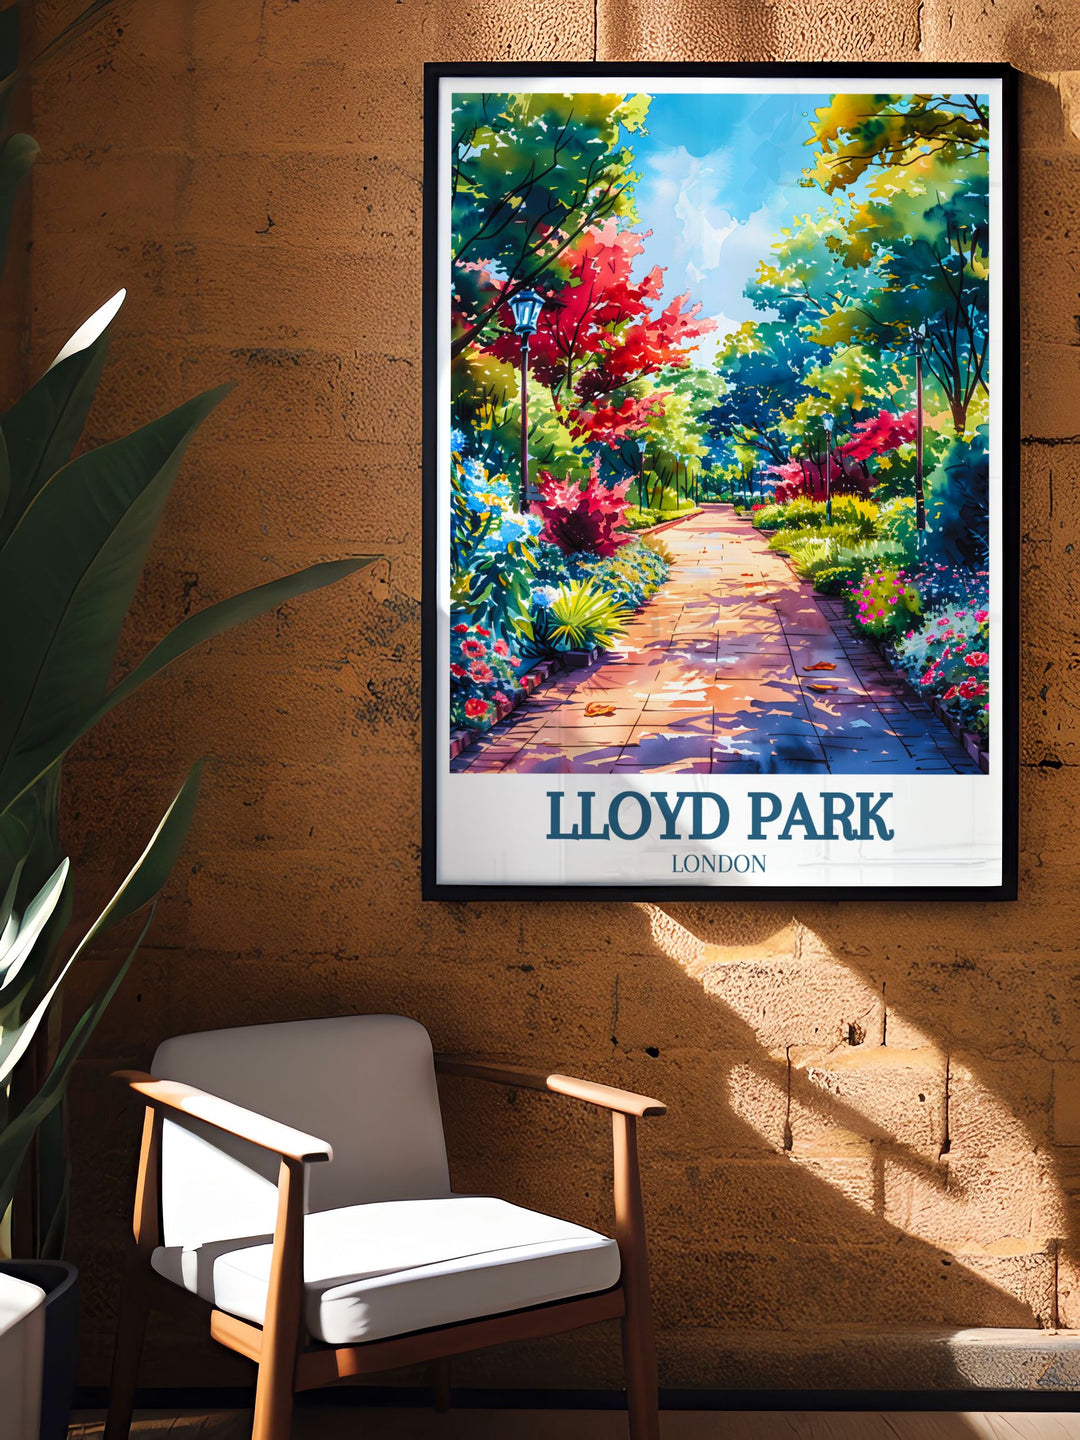 Beautifully detailed London park poster featuring the rose garden of Lloyd Park. Perfect for enhancing your living space with nature inspired art. An excellent gift for London lovers and art enthusiasts. Add this exquisite piece to your home decor.